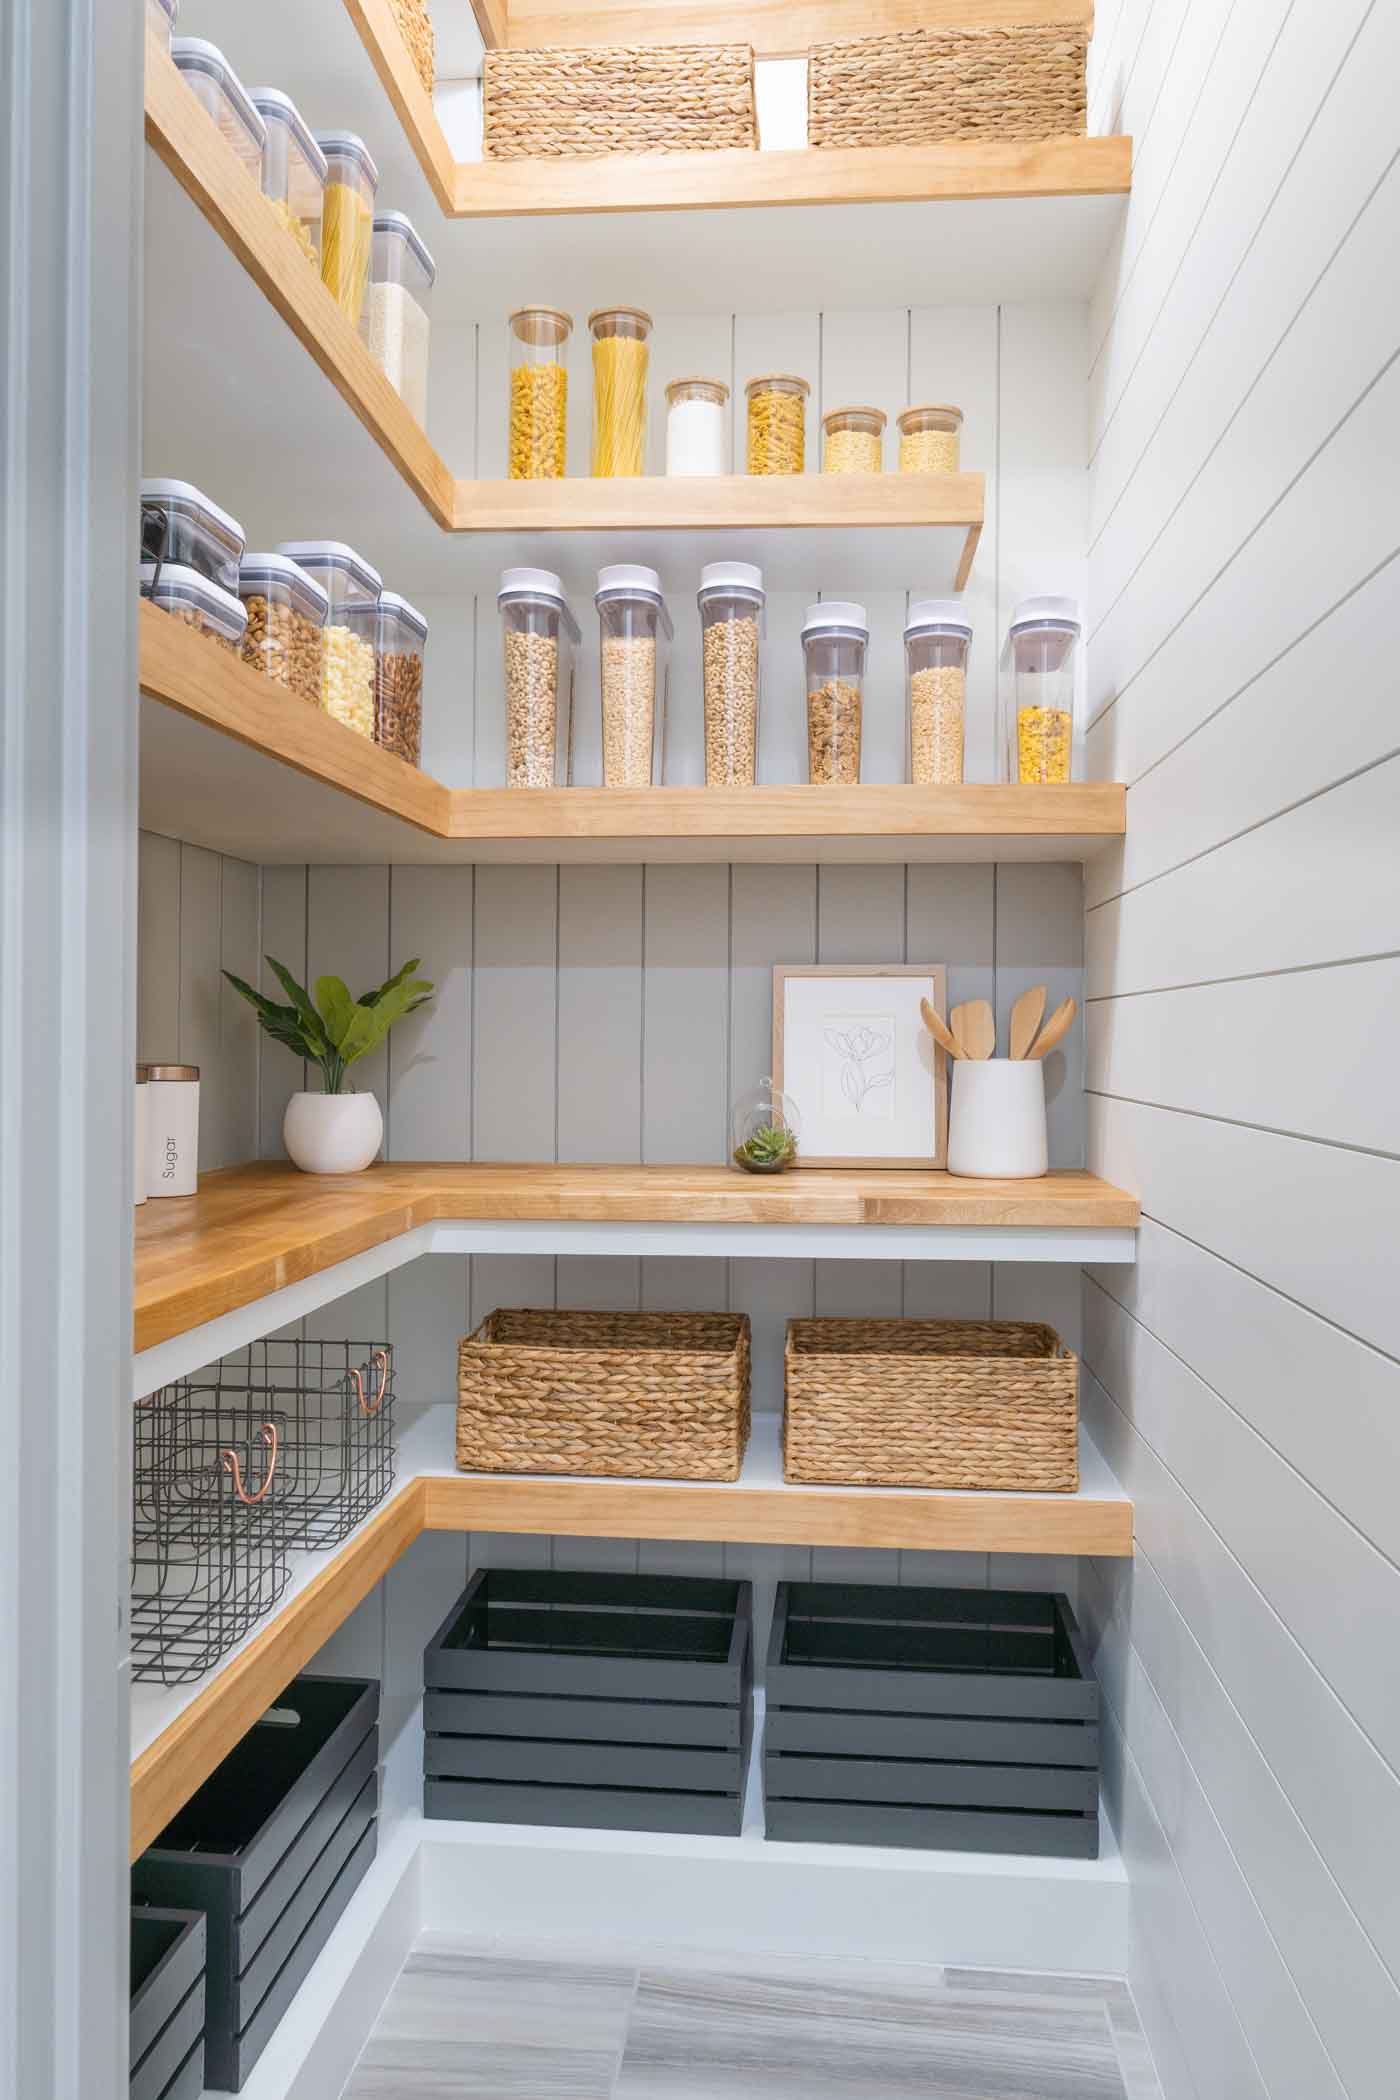 a picture of a pantry with white and gray shiplap walls, brown and white shelves, a wooden countertop, brown baskets, glass storage jars with bamboo lids, white canisters, wooden crates and metal baskets